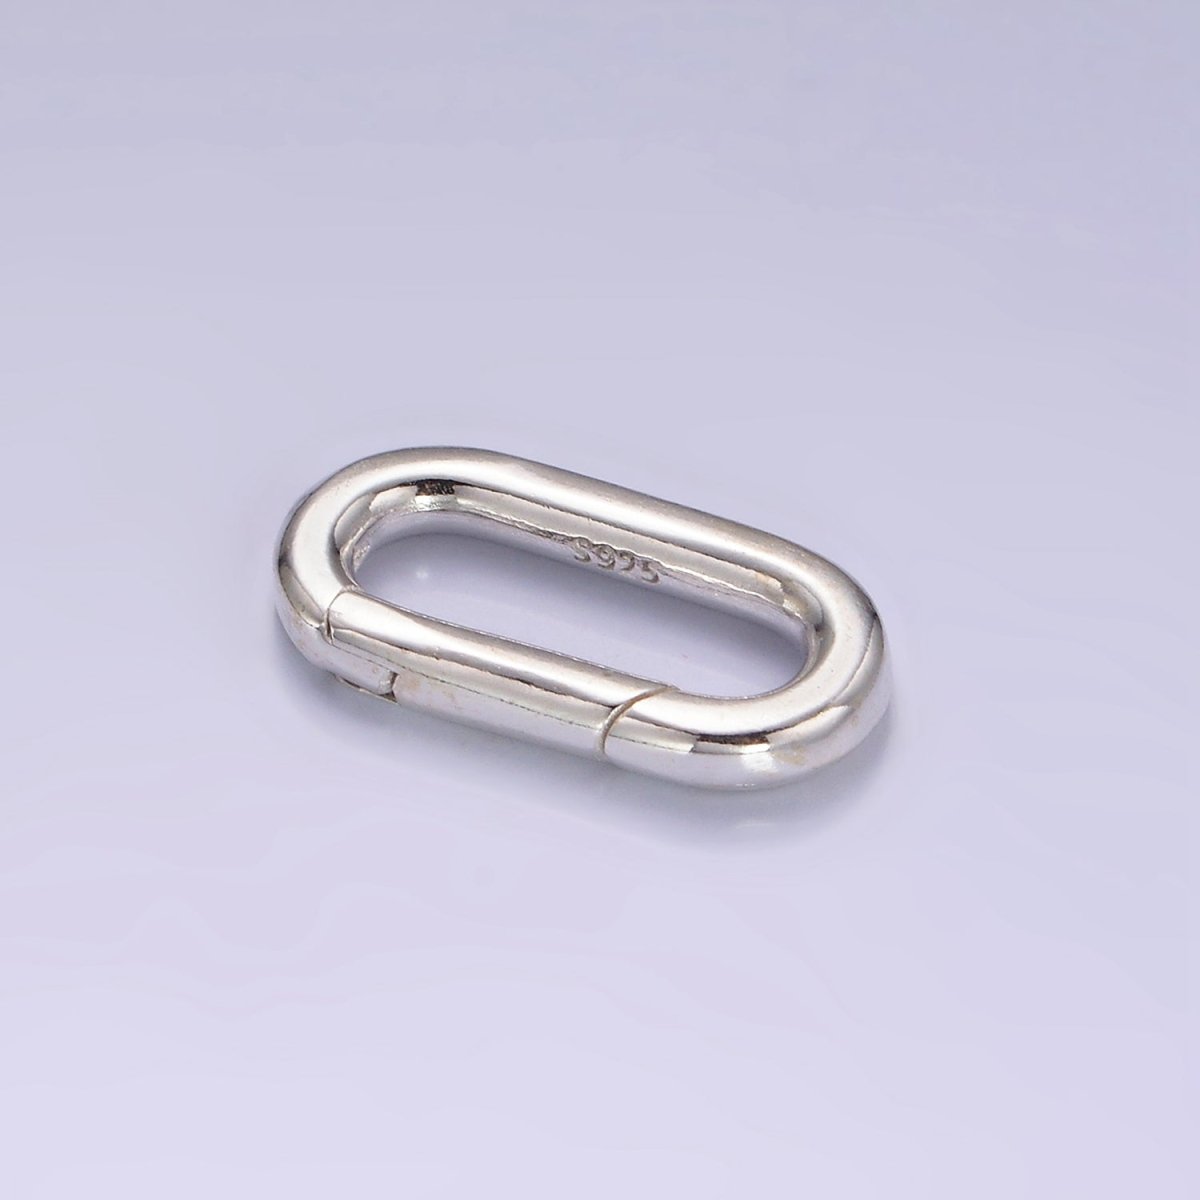 S925 Sterling Silver Oval Clasp Spring Gate Push Clip Clasp for Charm Holder SL-474 - DLUXCA